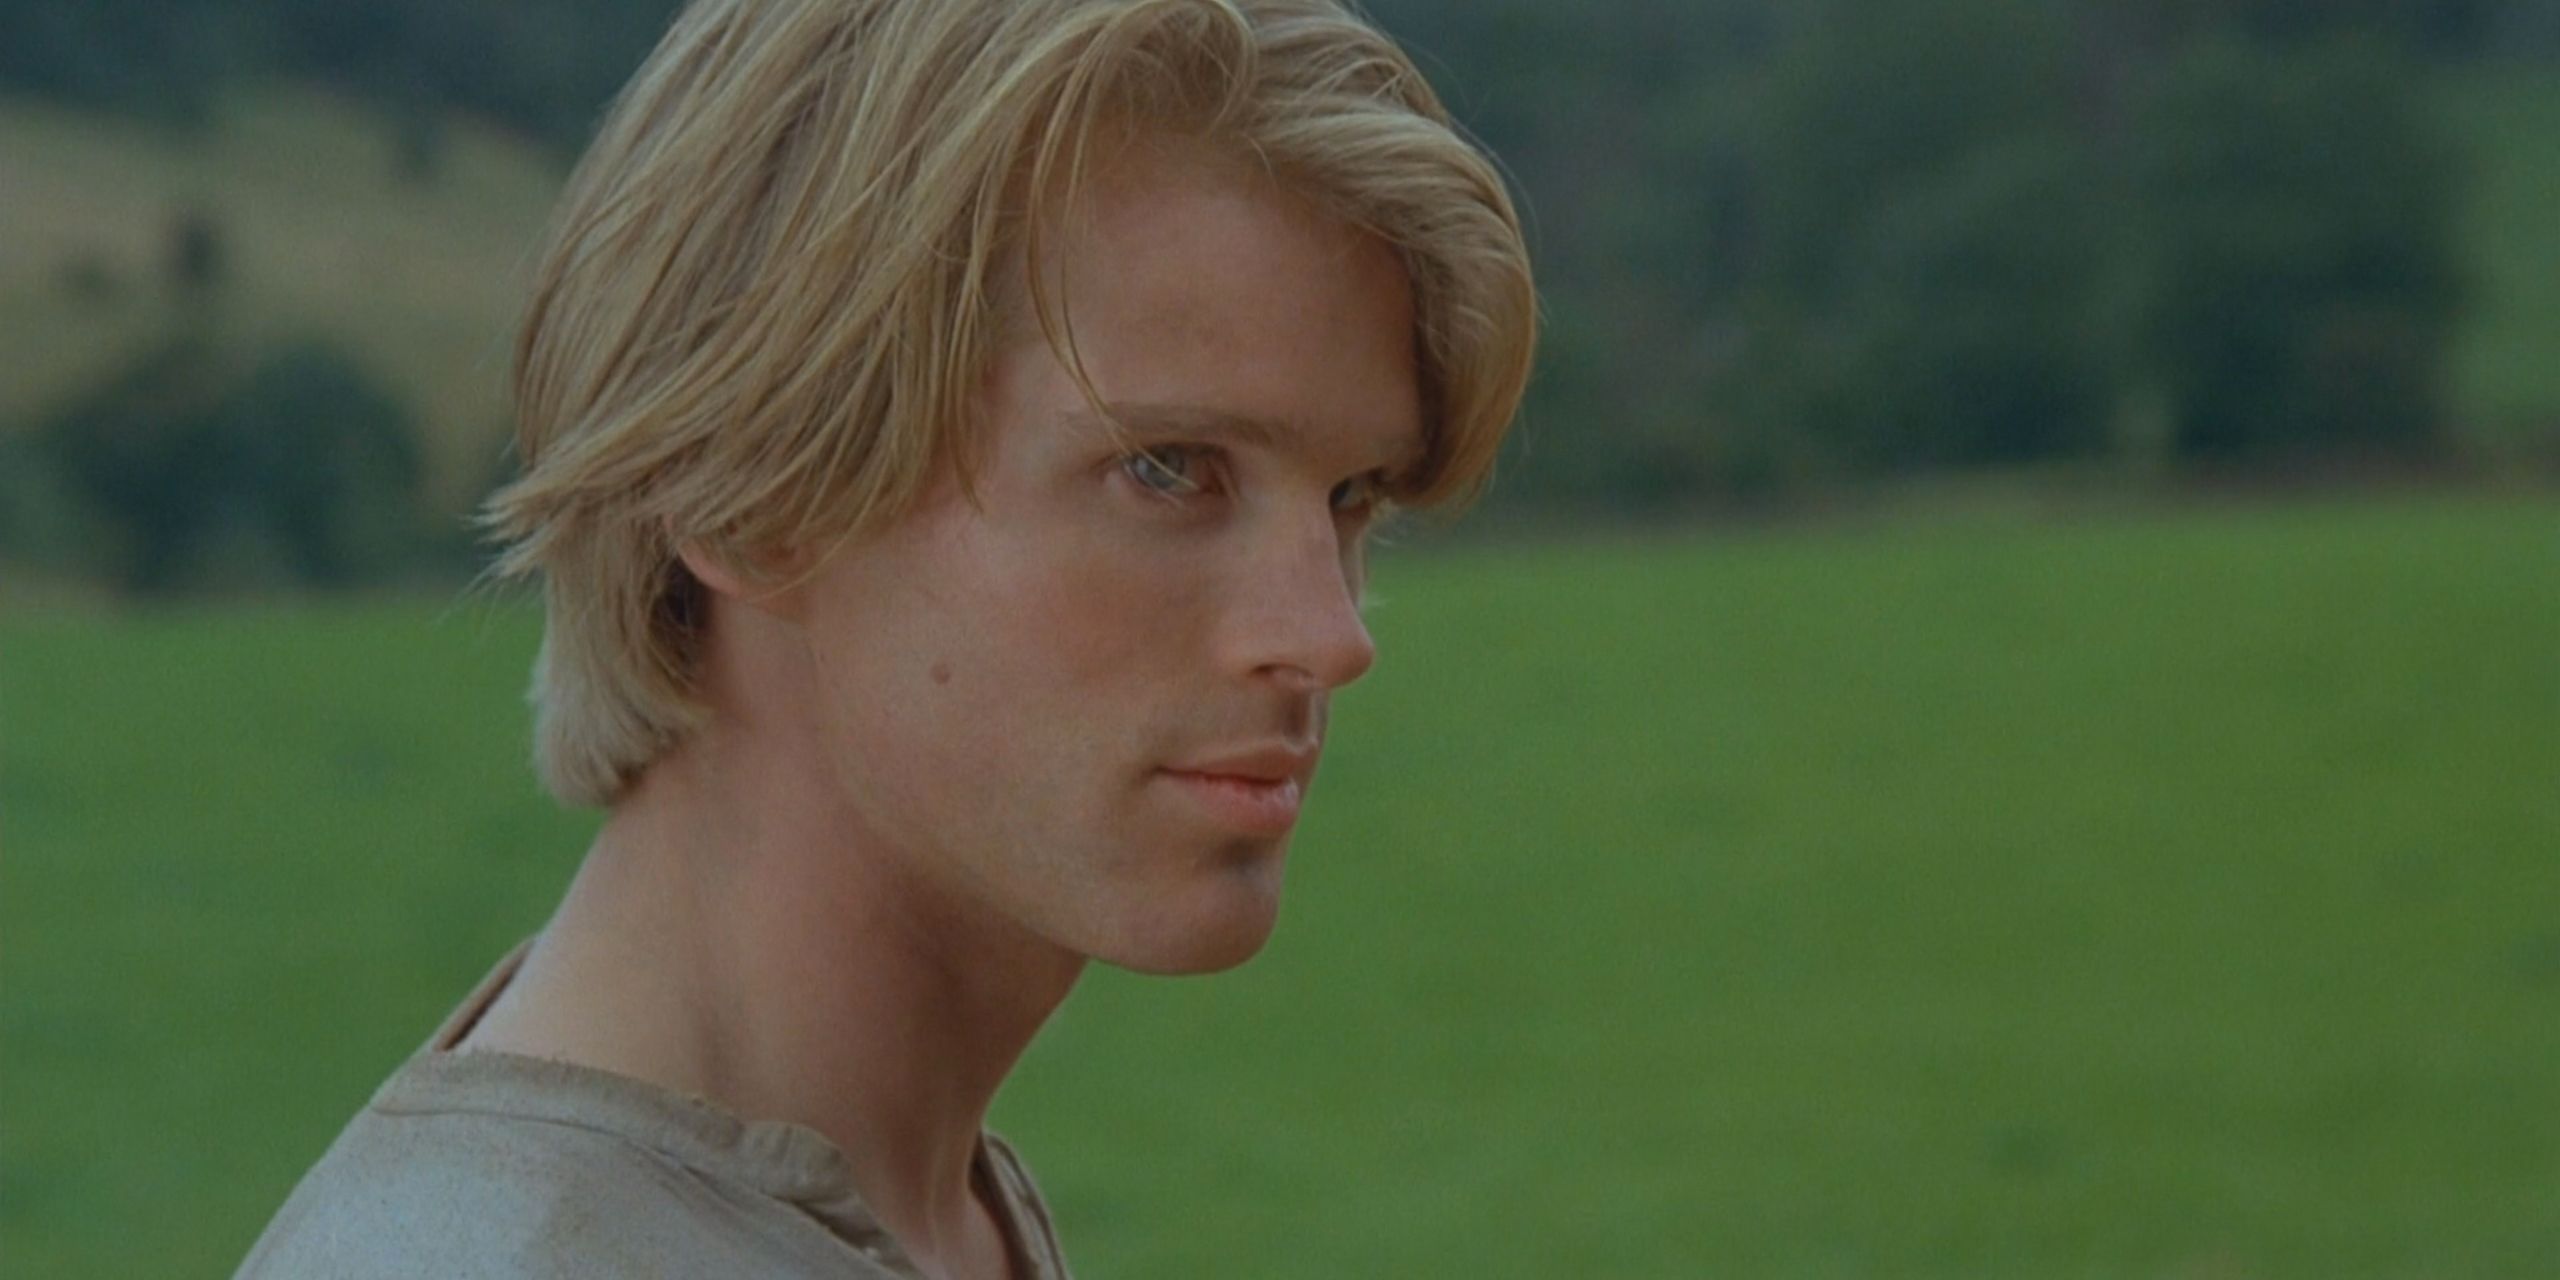 Westley from &quot;The Princess Bride&quot;, at the beginning of the film when he is known as &quot;farmboy.&quot;